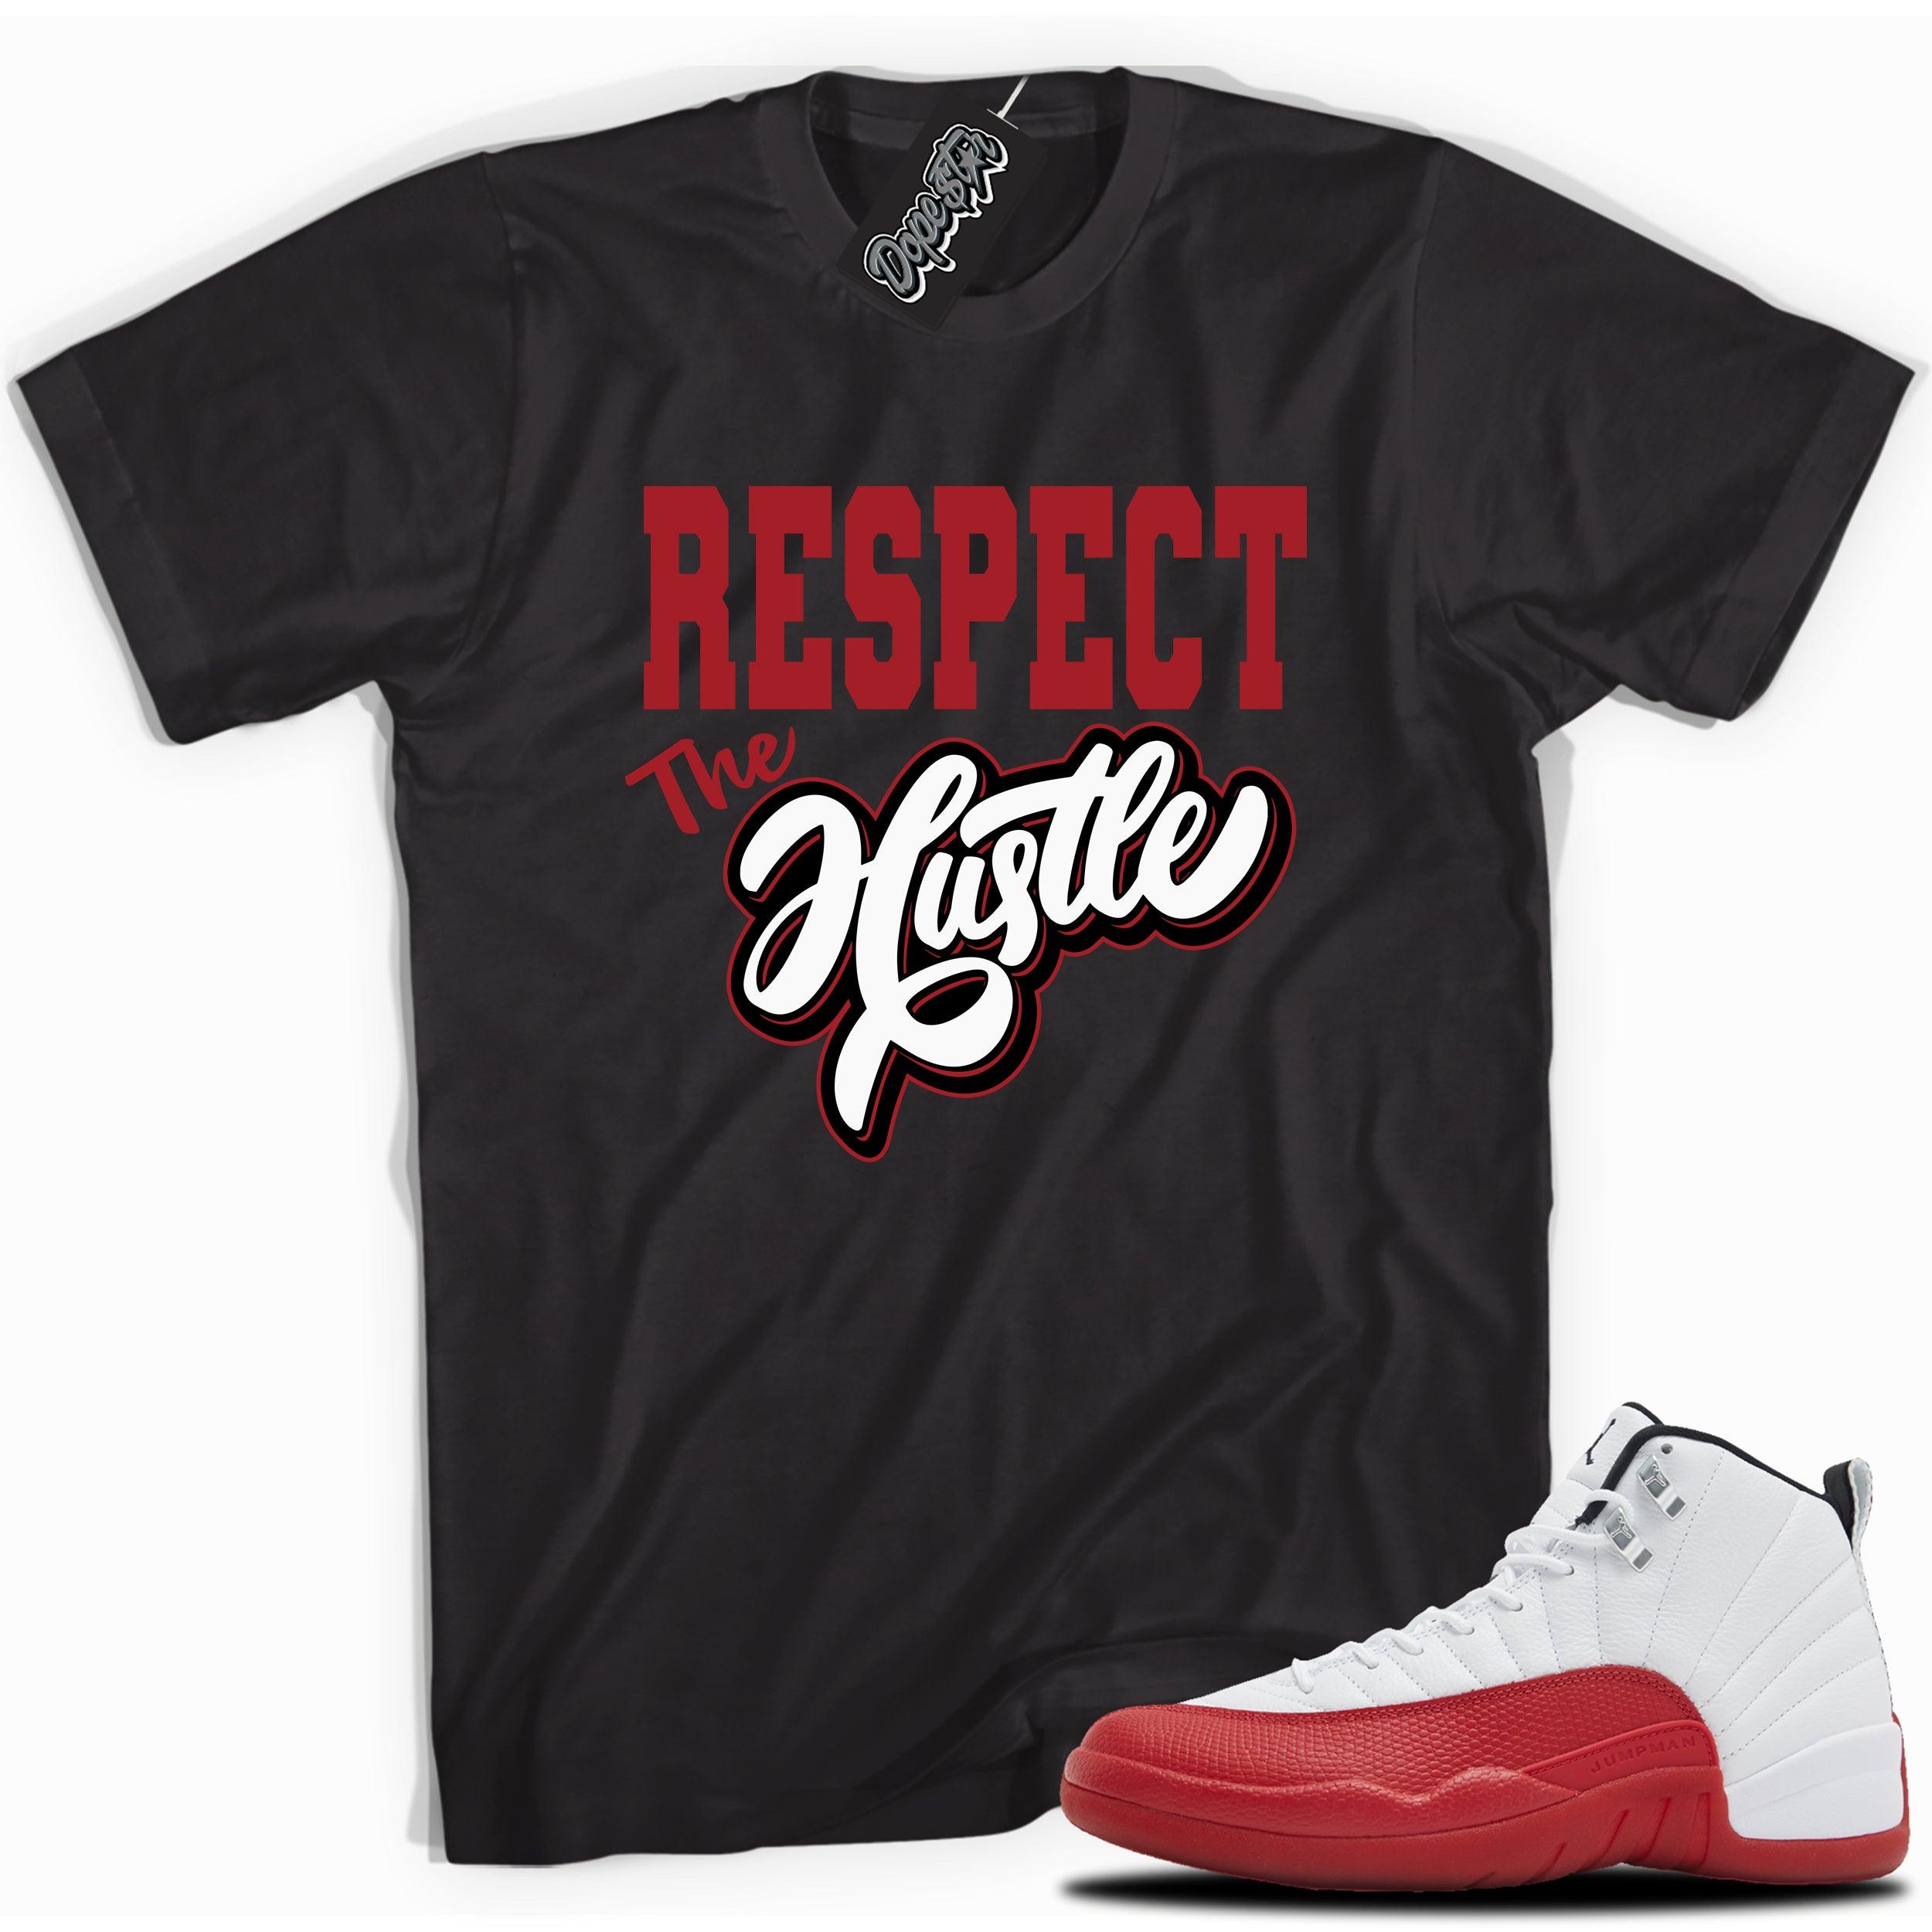 Cool Black graphic tee with “Respect The Hustle” print, that perfectly matches Air Jordan 12 Retro Cherry Red 2023 red and white sneakers 